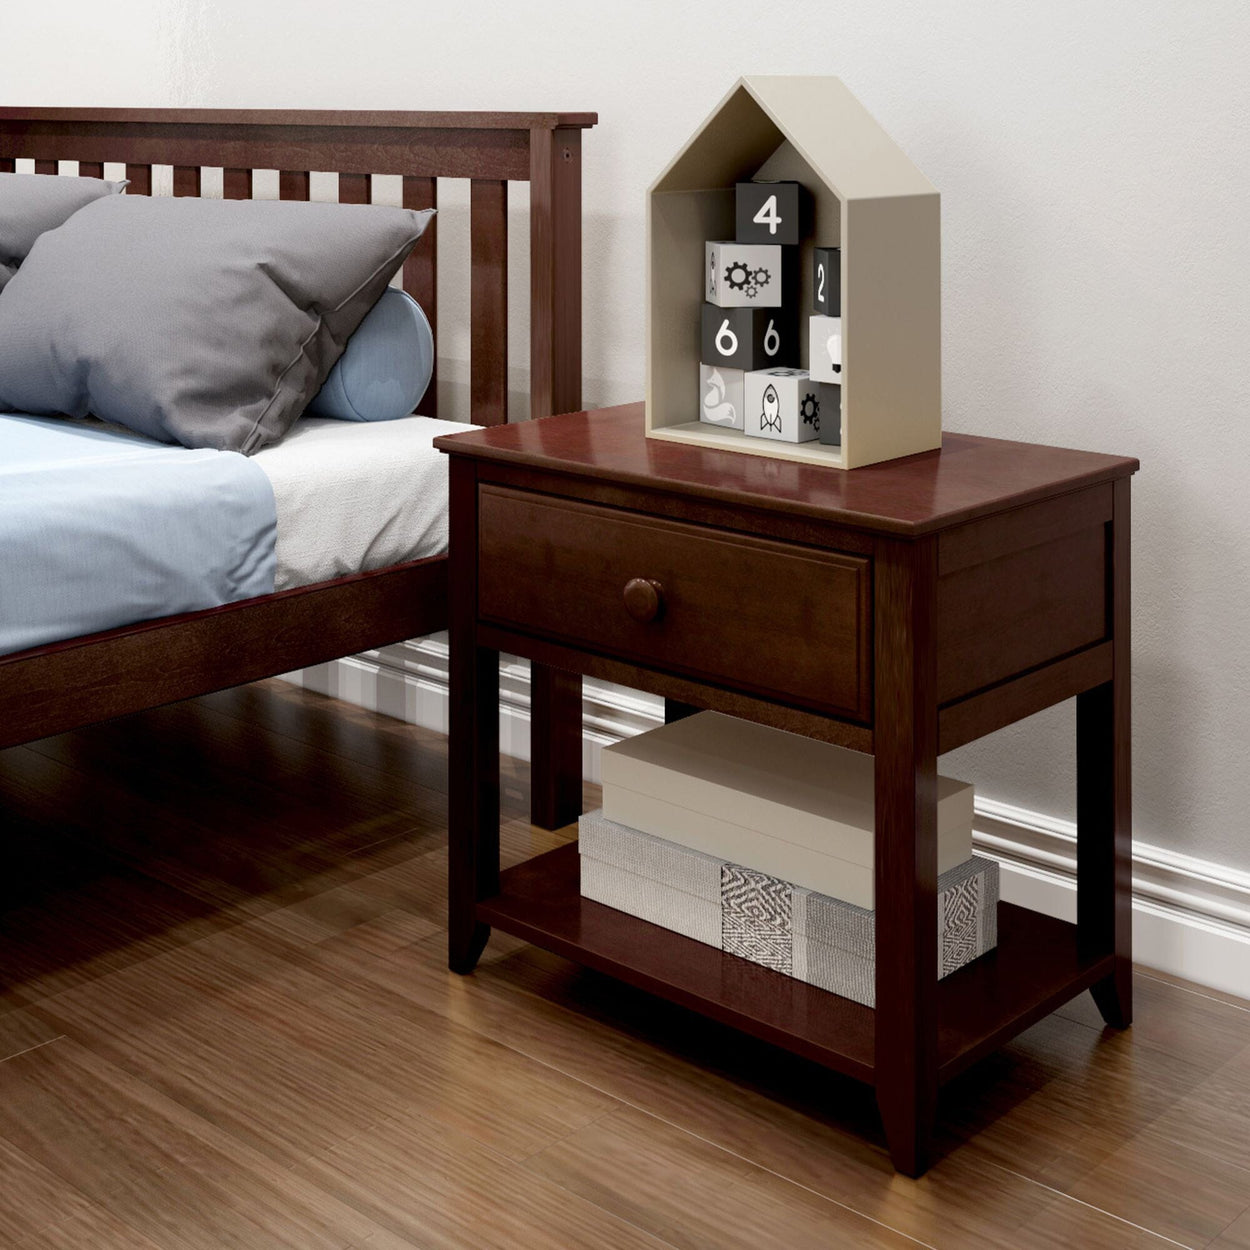 180001-005 : Furniture Nightstand with Drawer and Shelf, Espresso